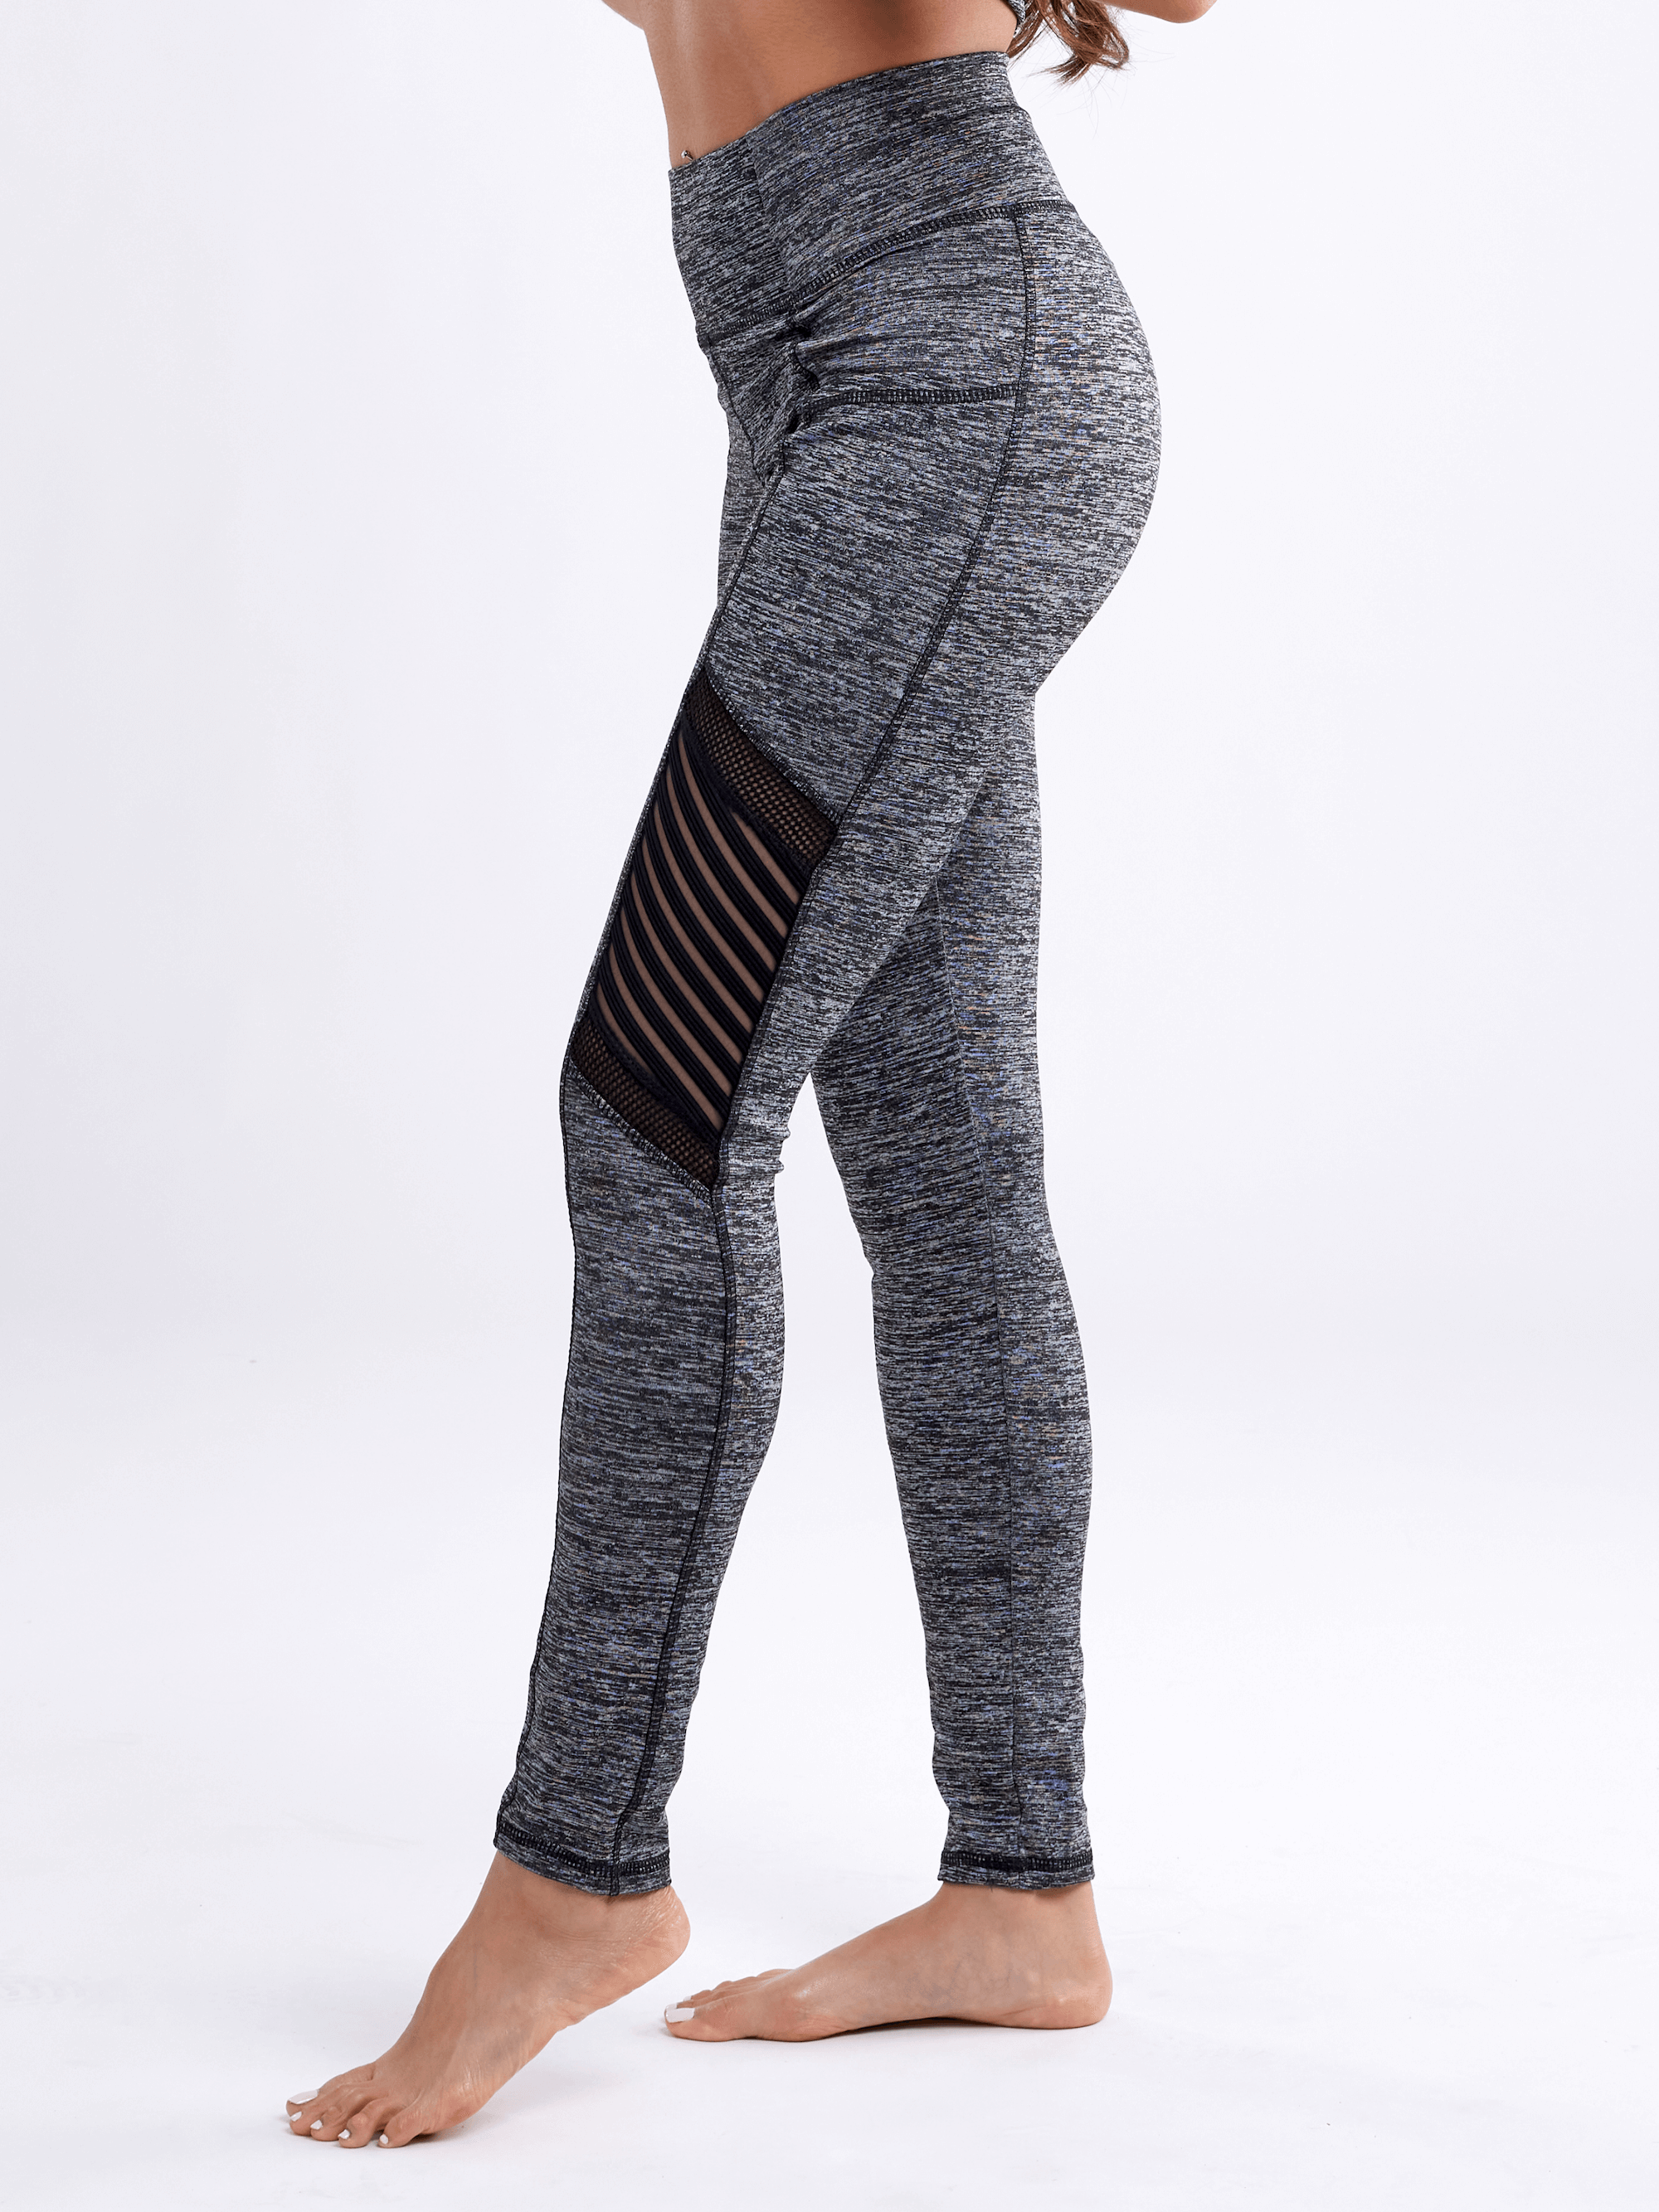 Is That The New Contrast Mesh Wide Waistband Sports Leggings